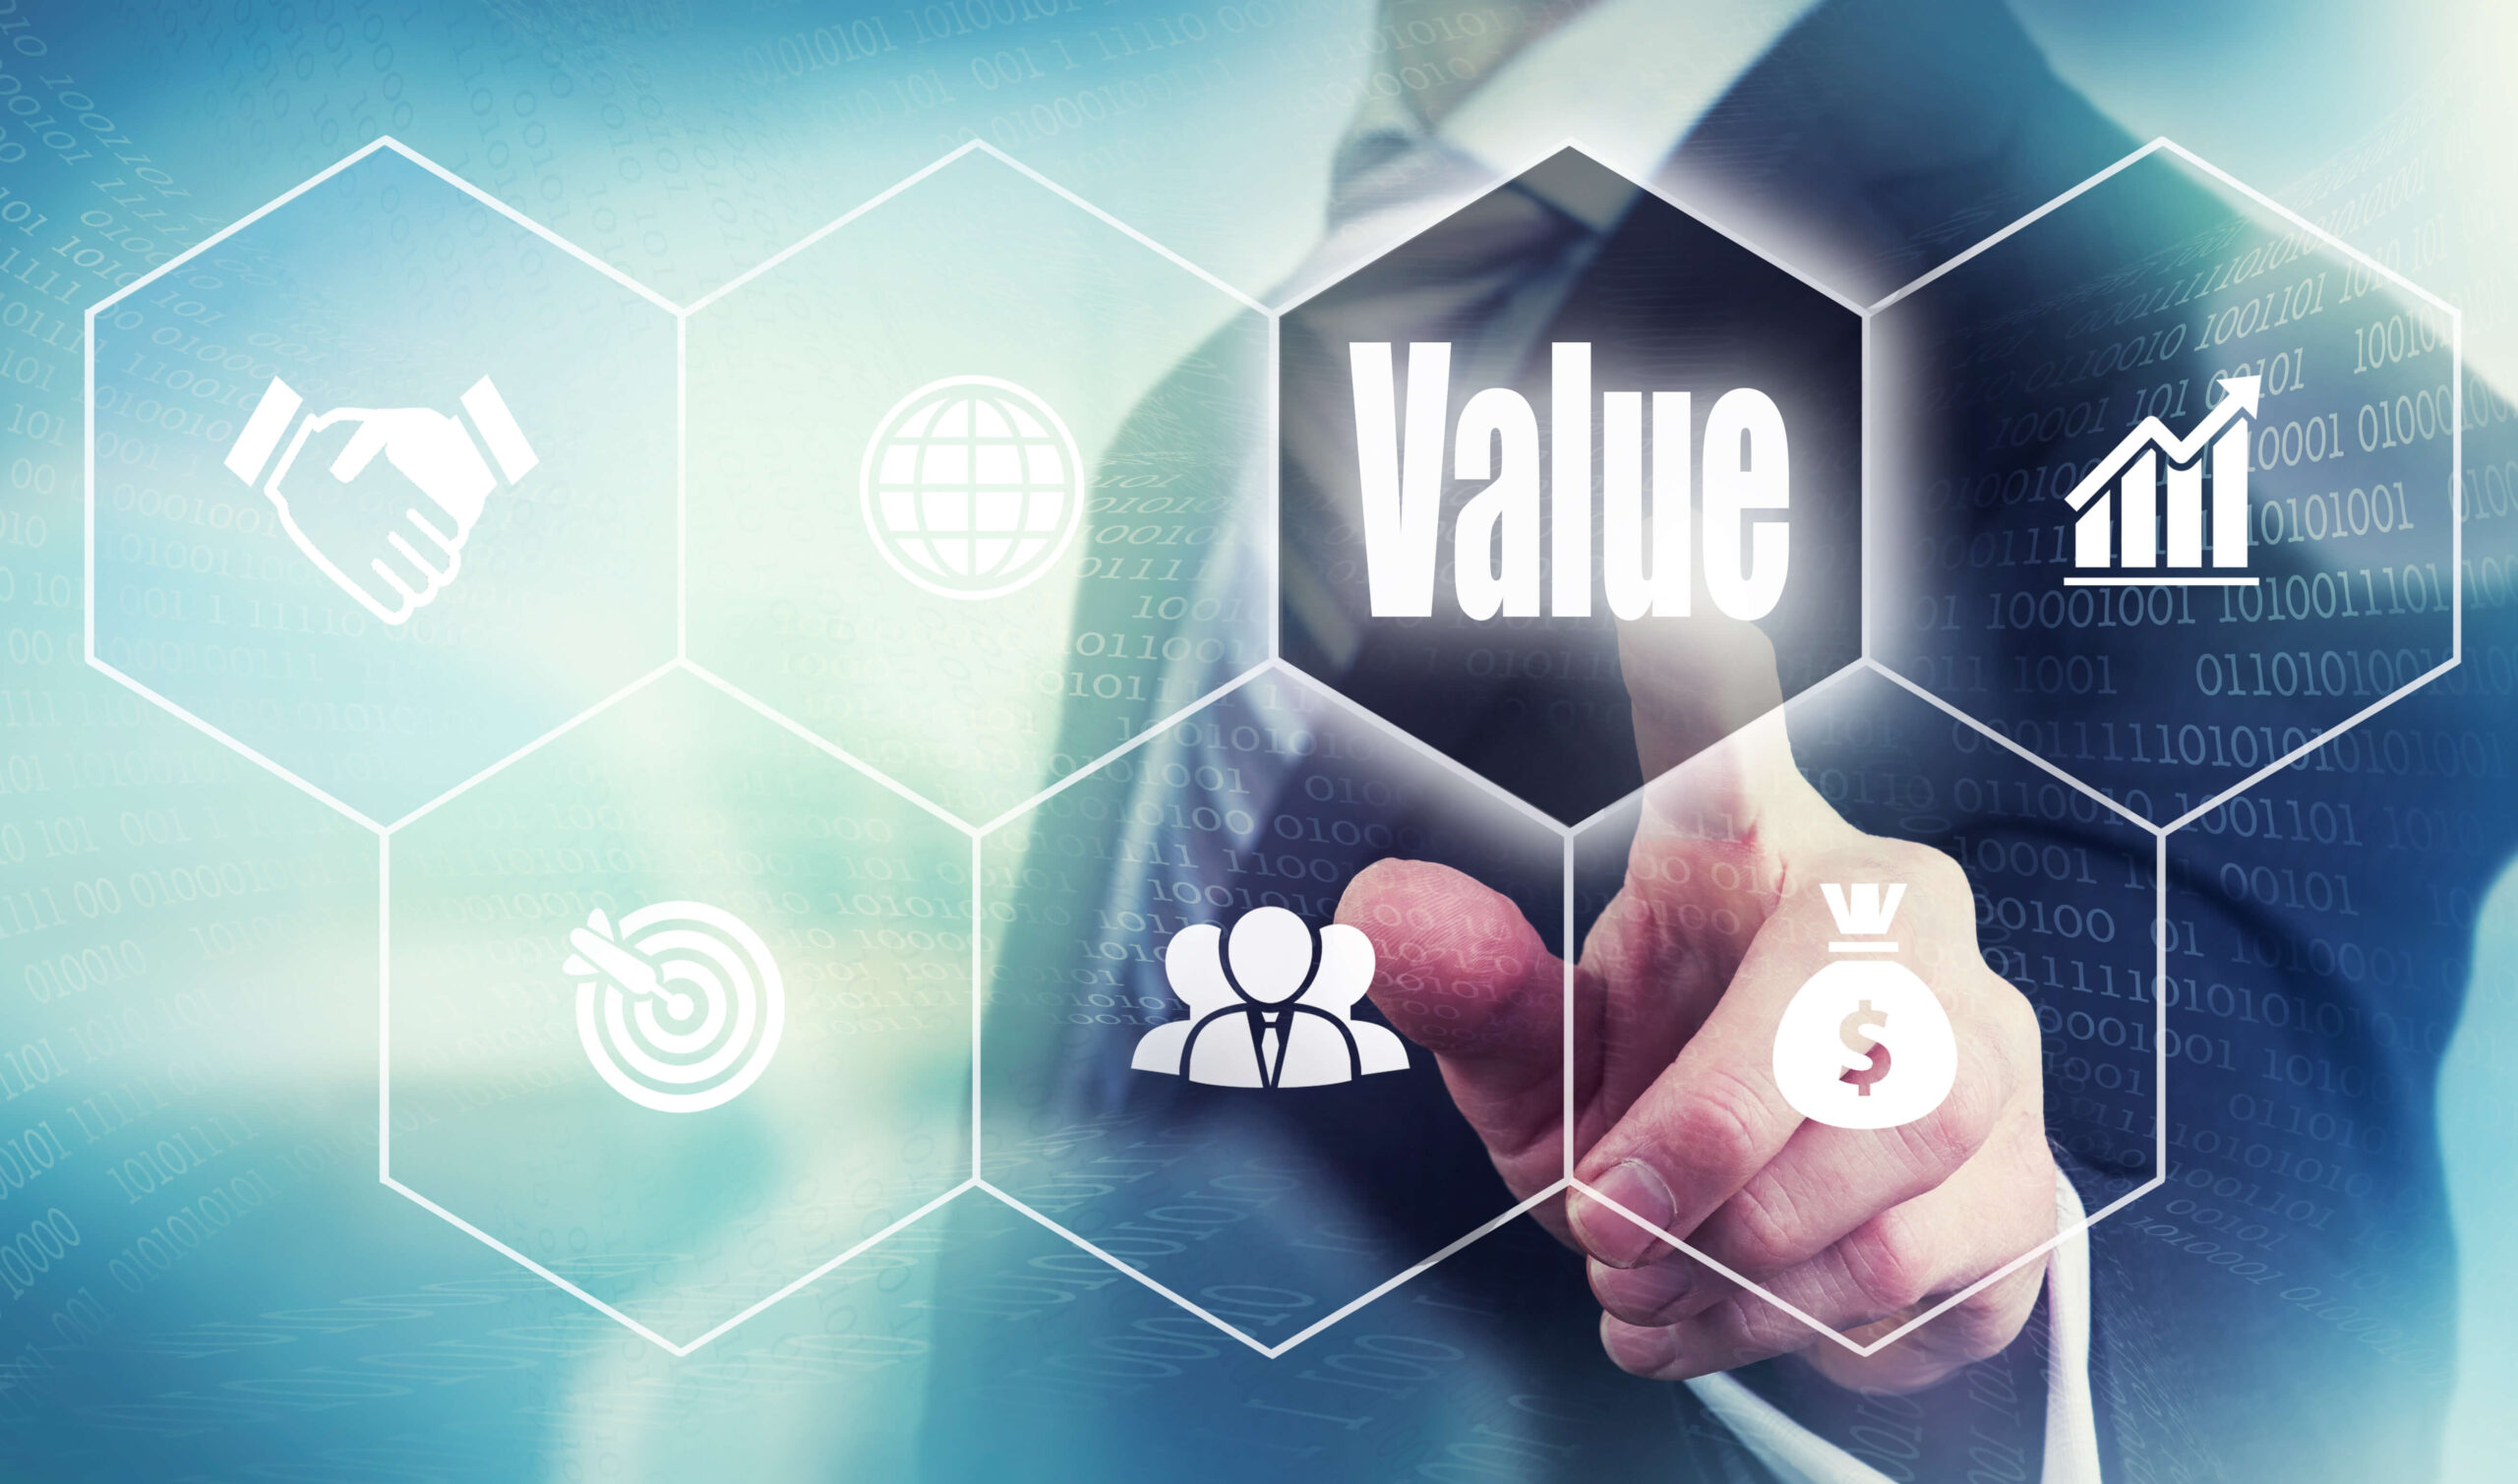 The right property management association adds value. Here’s why.